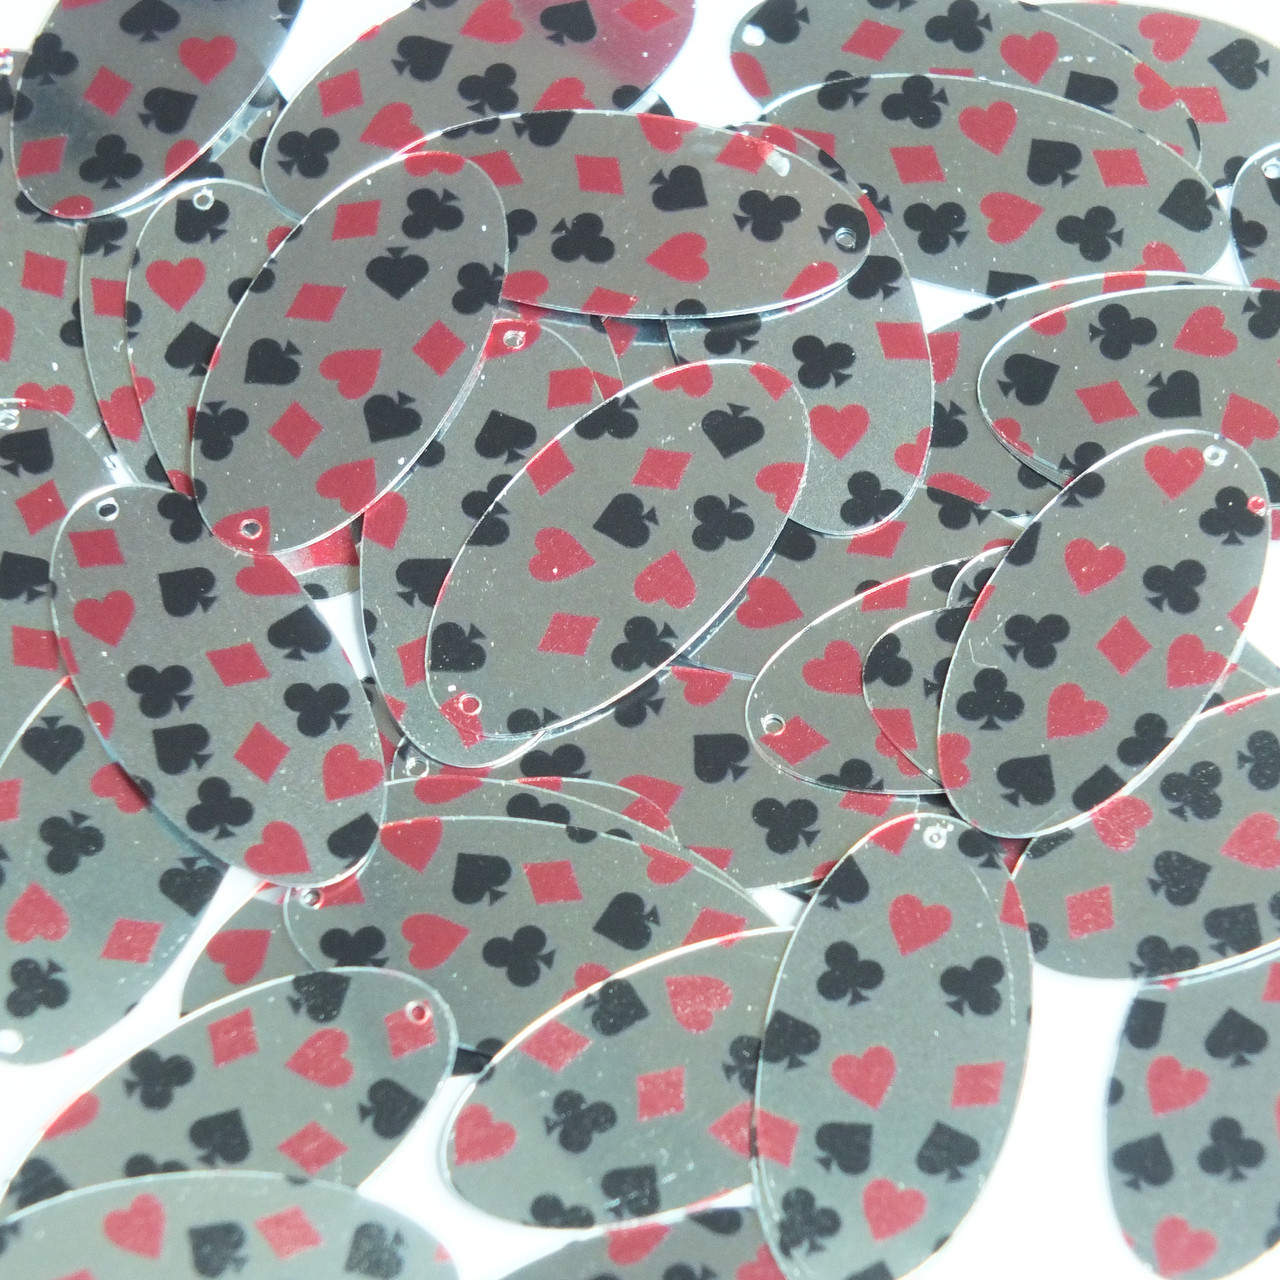 Oval Sequins 1.5" Playing Card Clubs Hearts Spades Diamonds Silver Metallic